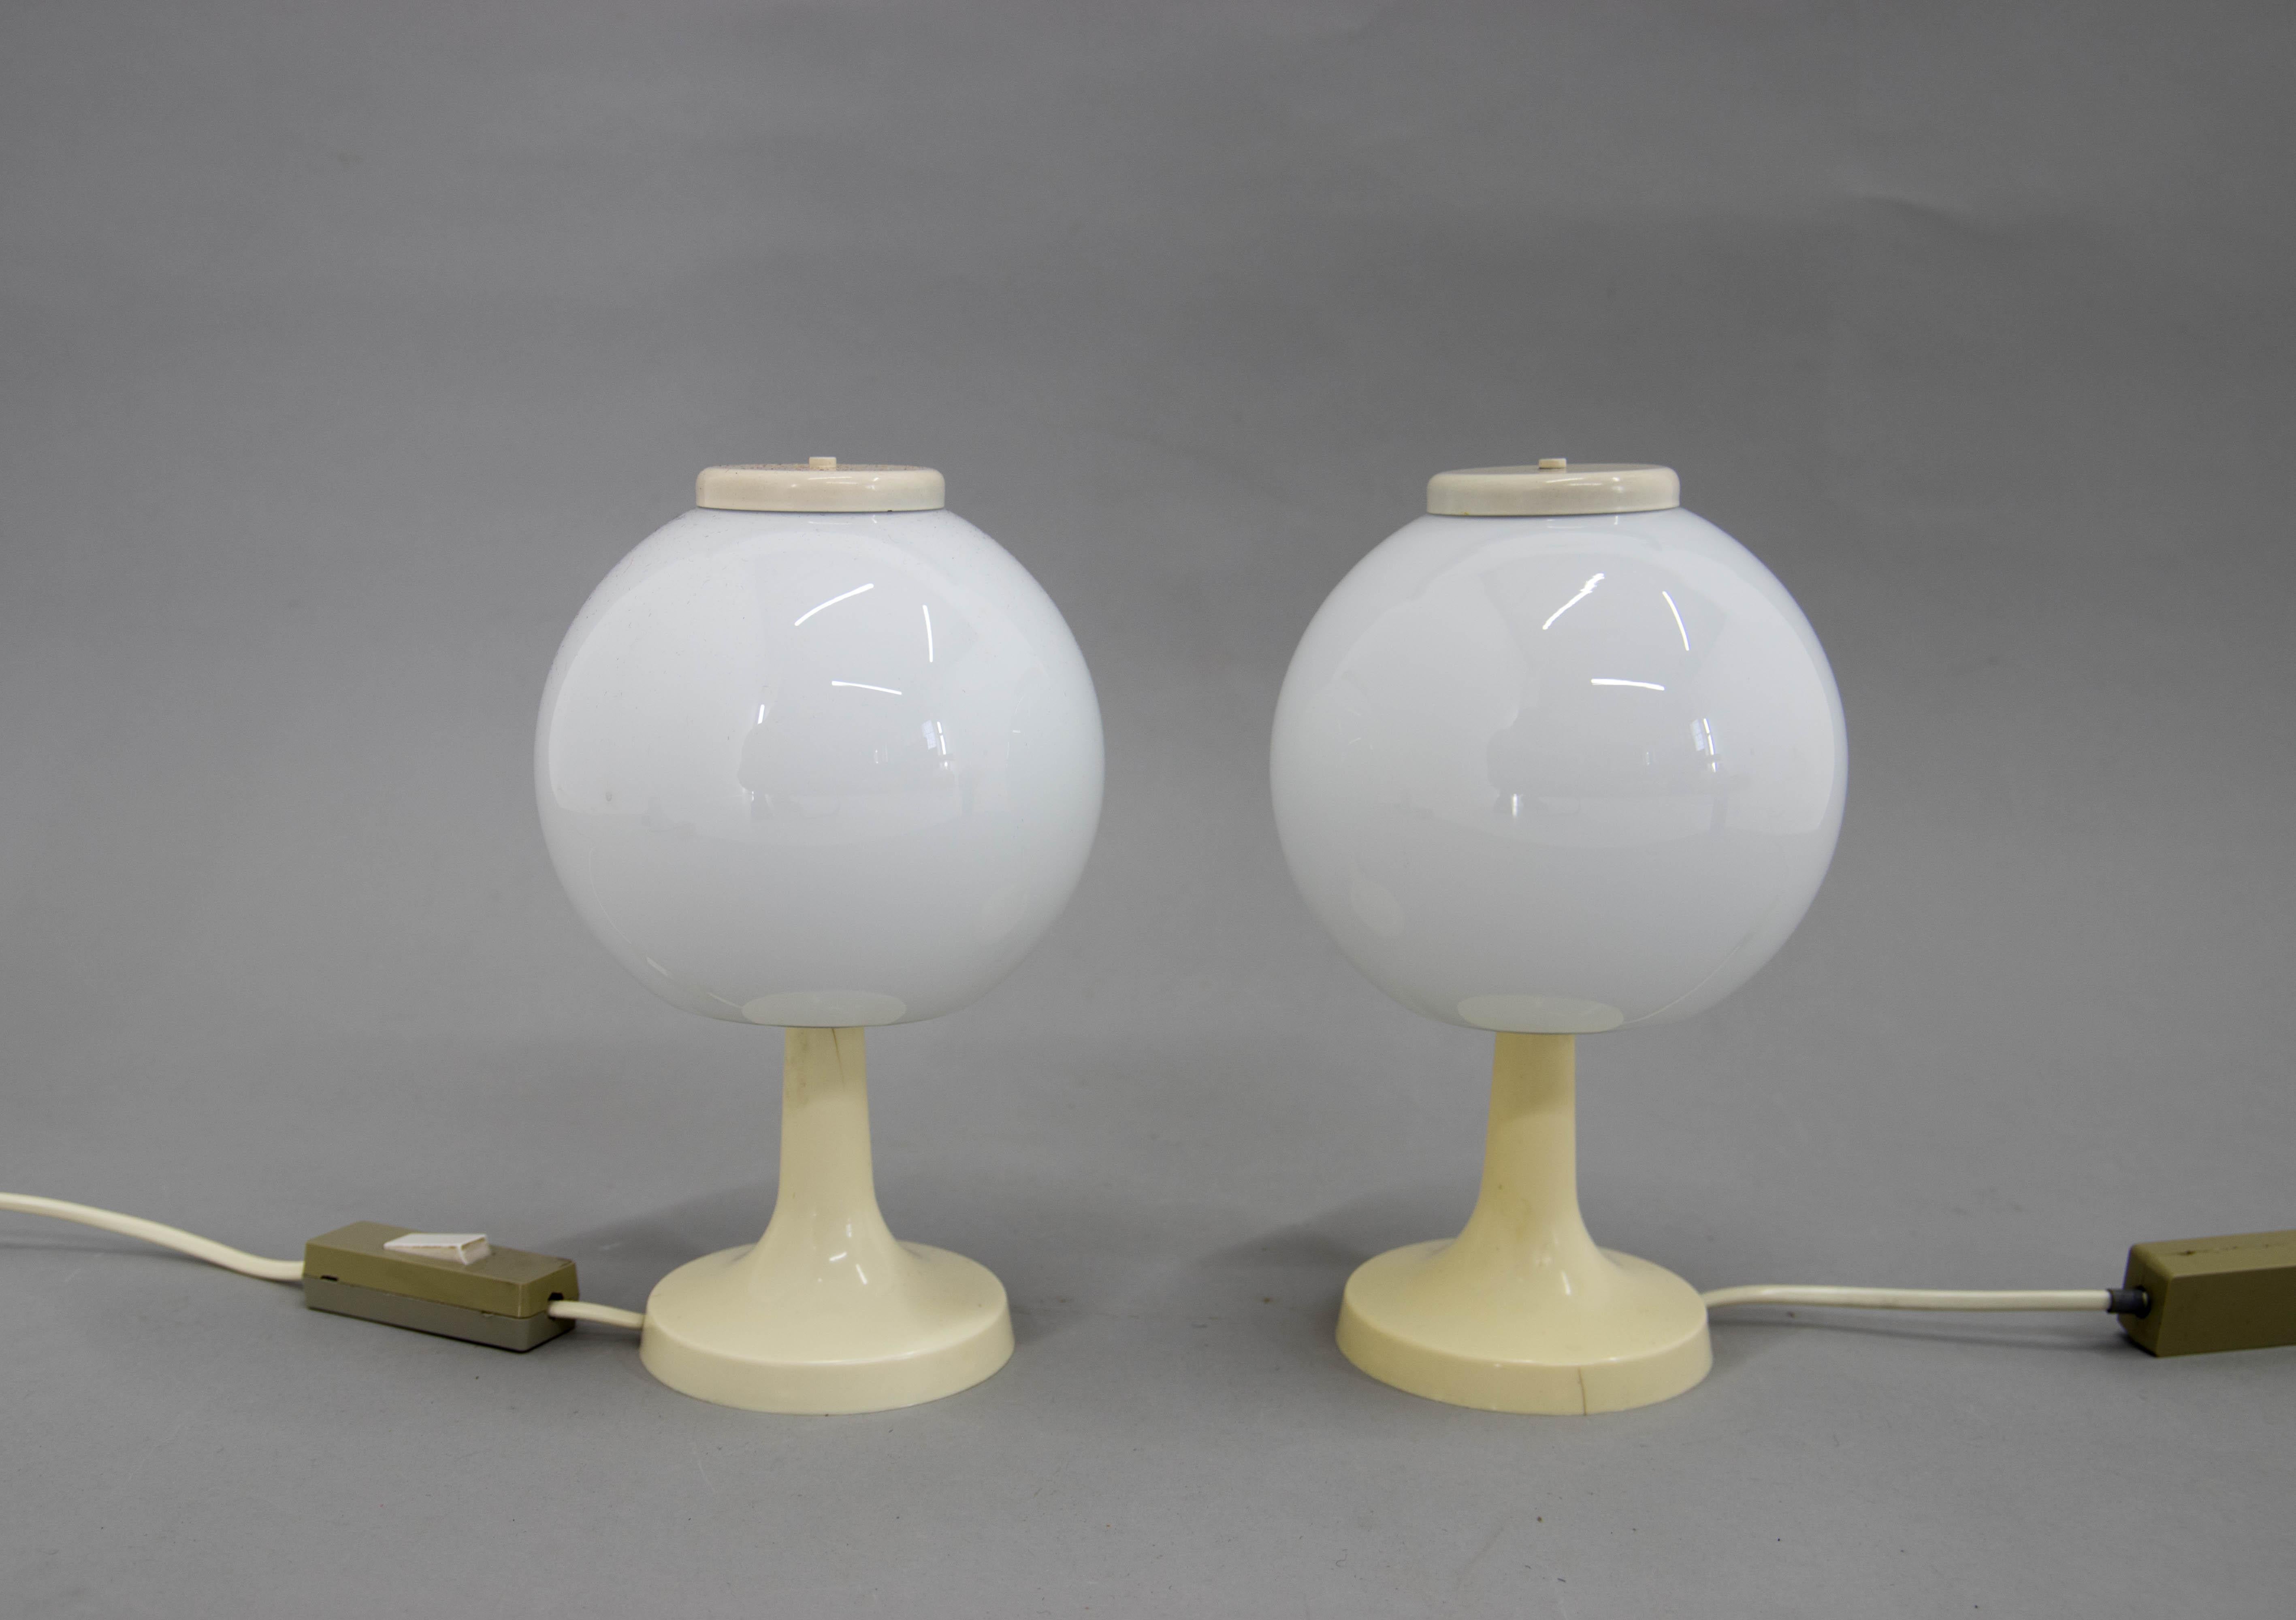 Two Mid-century bedside or table lamps.
Plastic base and milk glass shade.
40W, E12-E14 bulbs
US plug adapter included